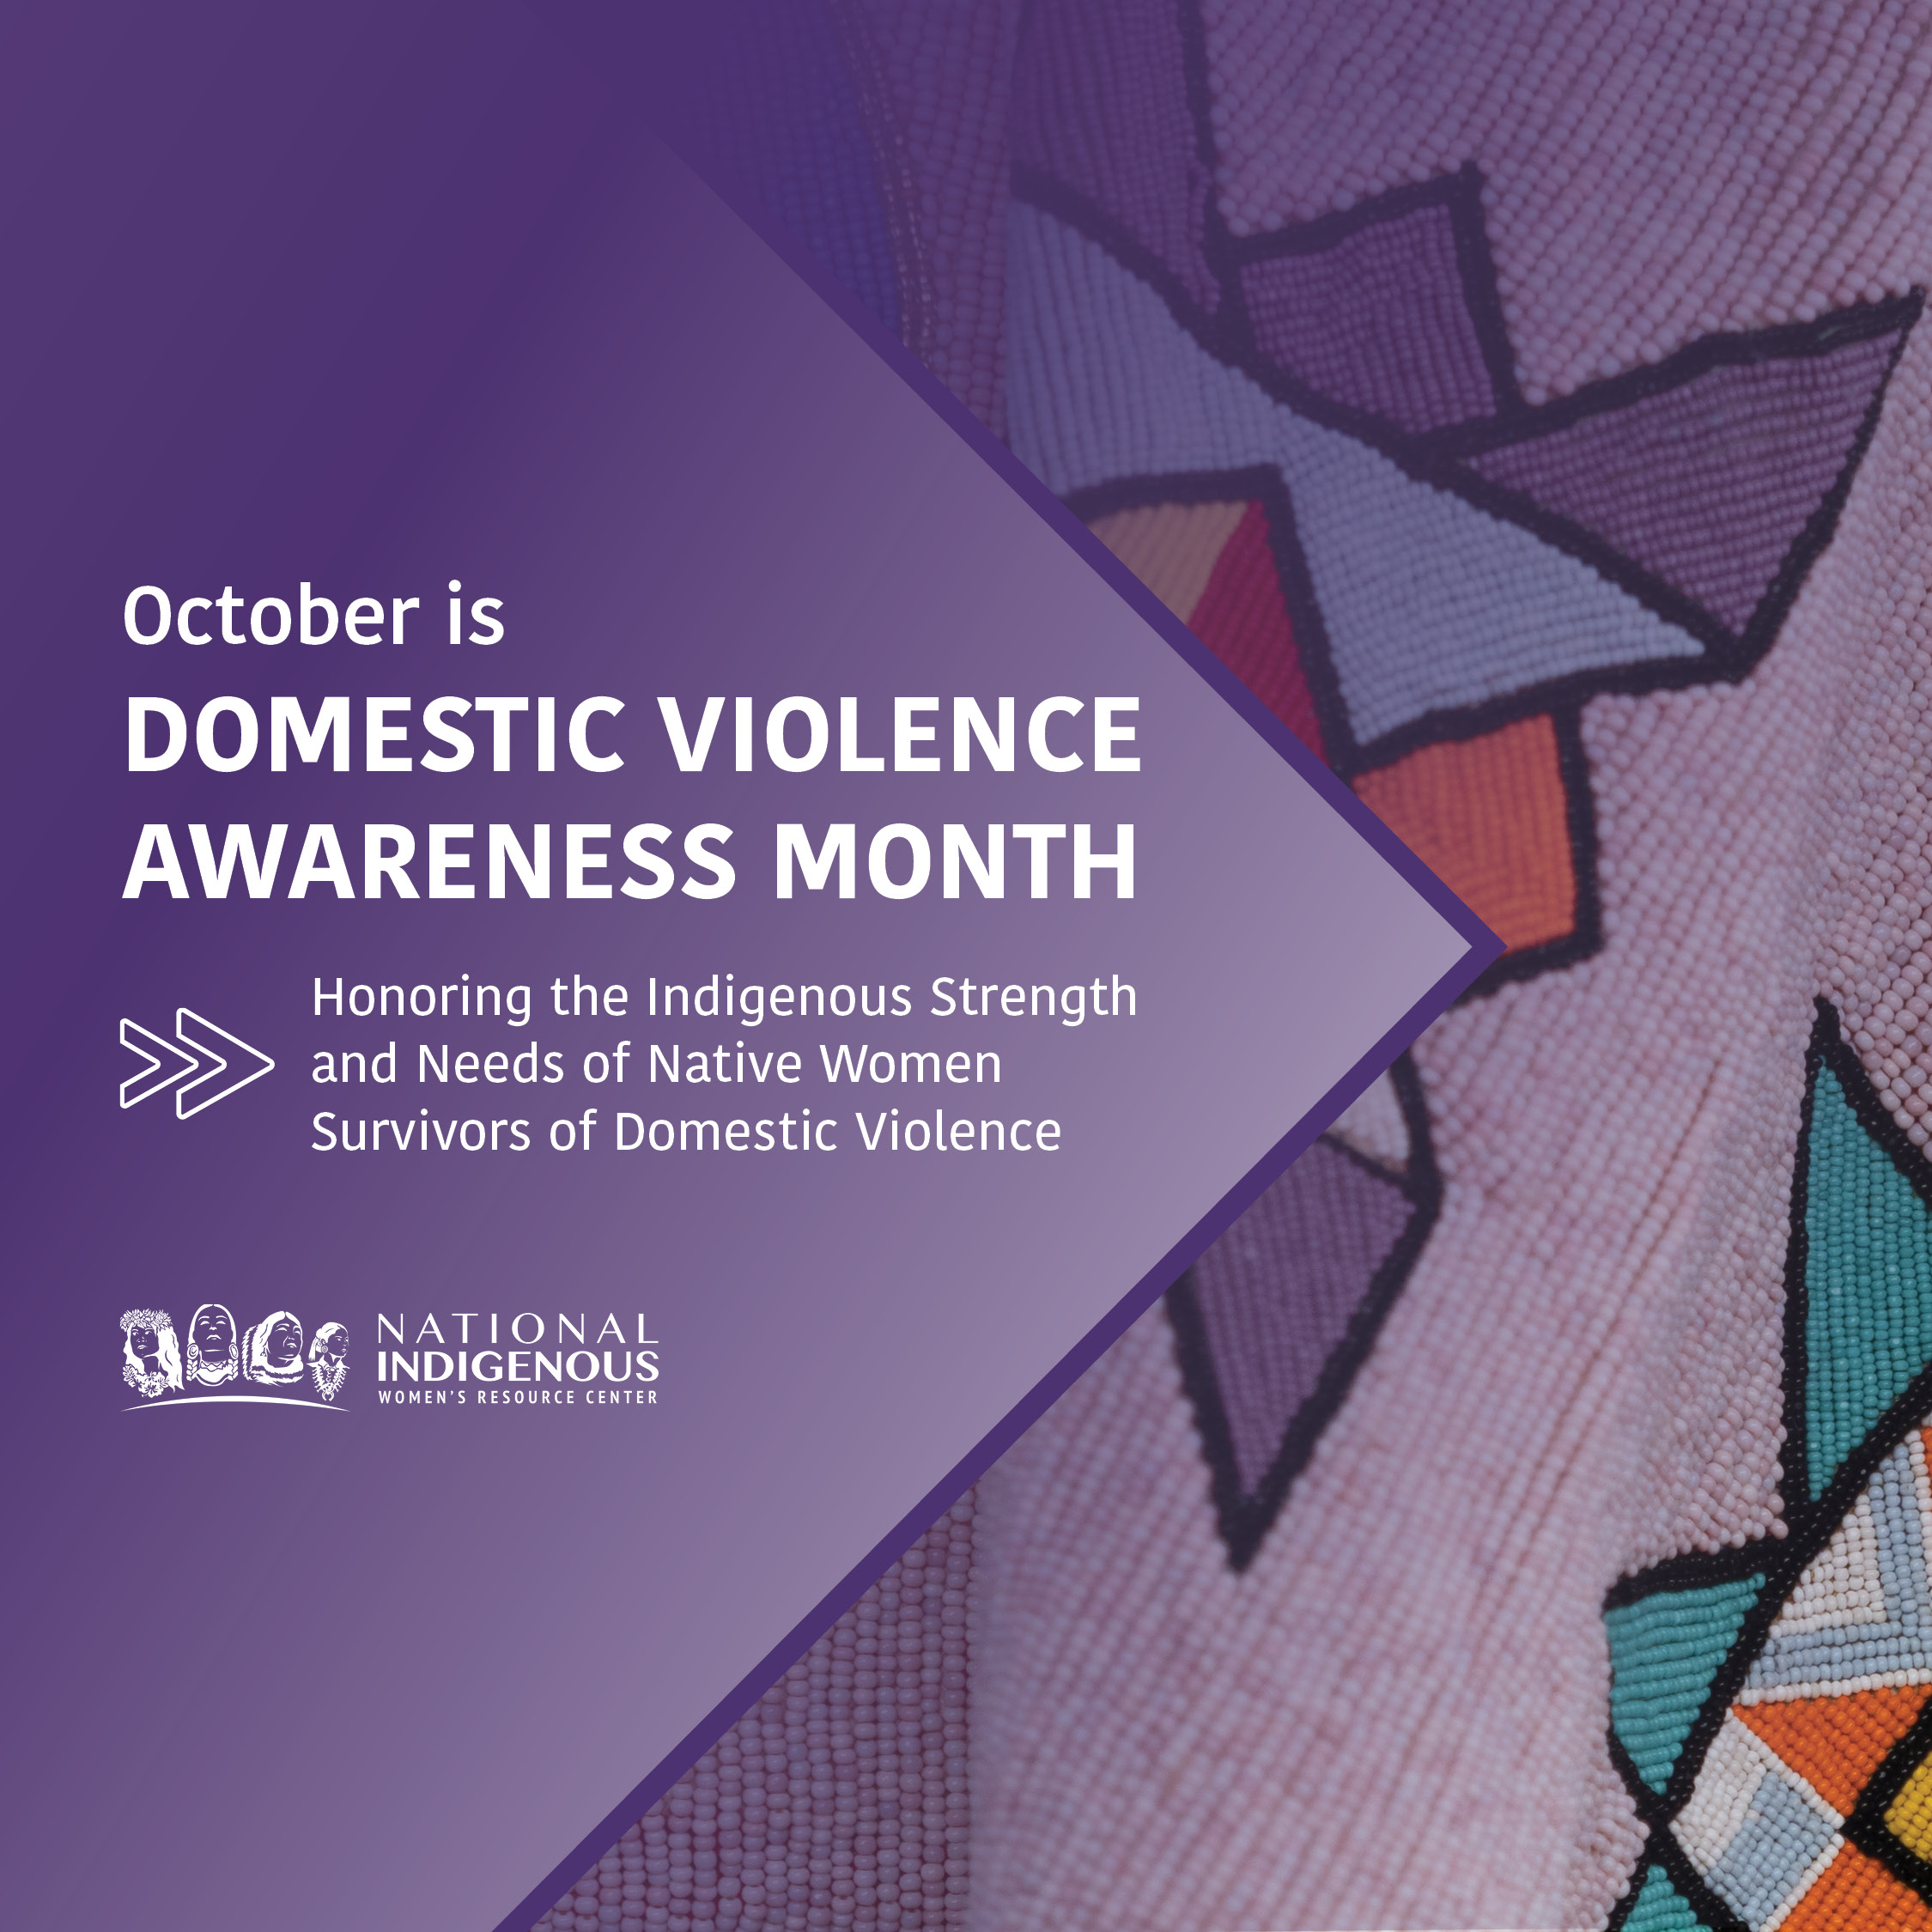 "Native blanket and purple background with text, "October is Domestic Violence Awareness Month, Honoring the Indigenous Strength and Needs of Native Women Survivors of Domestic Violence" plus white NIWRC logo."